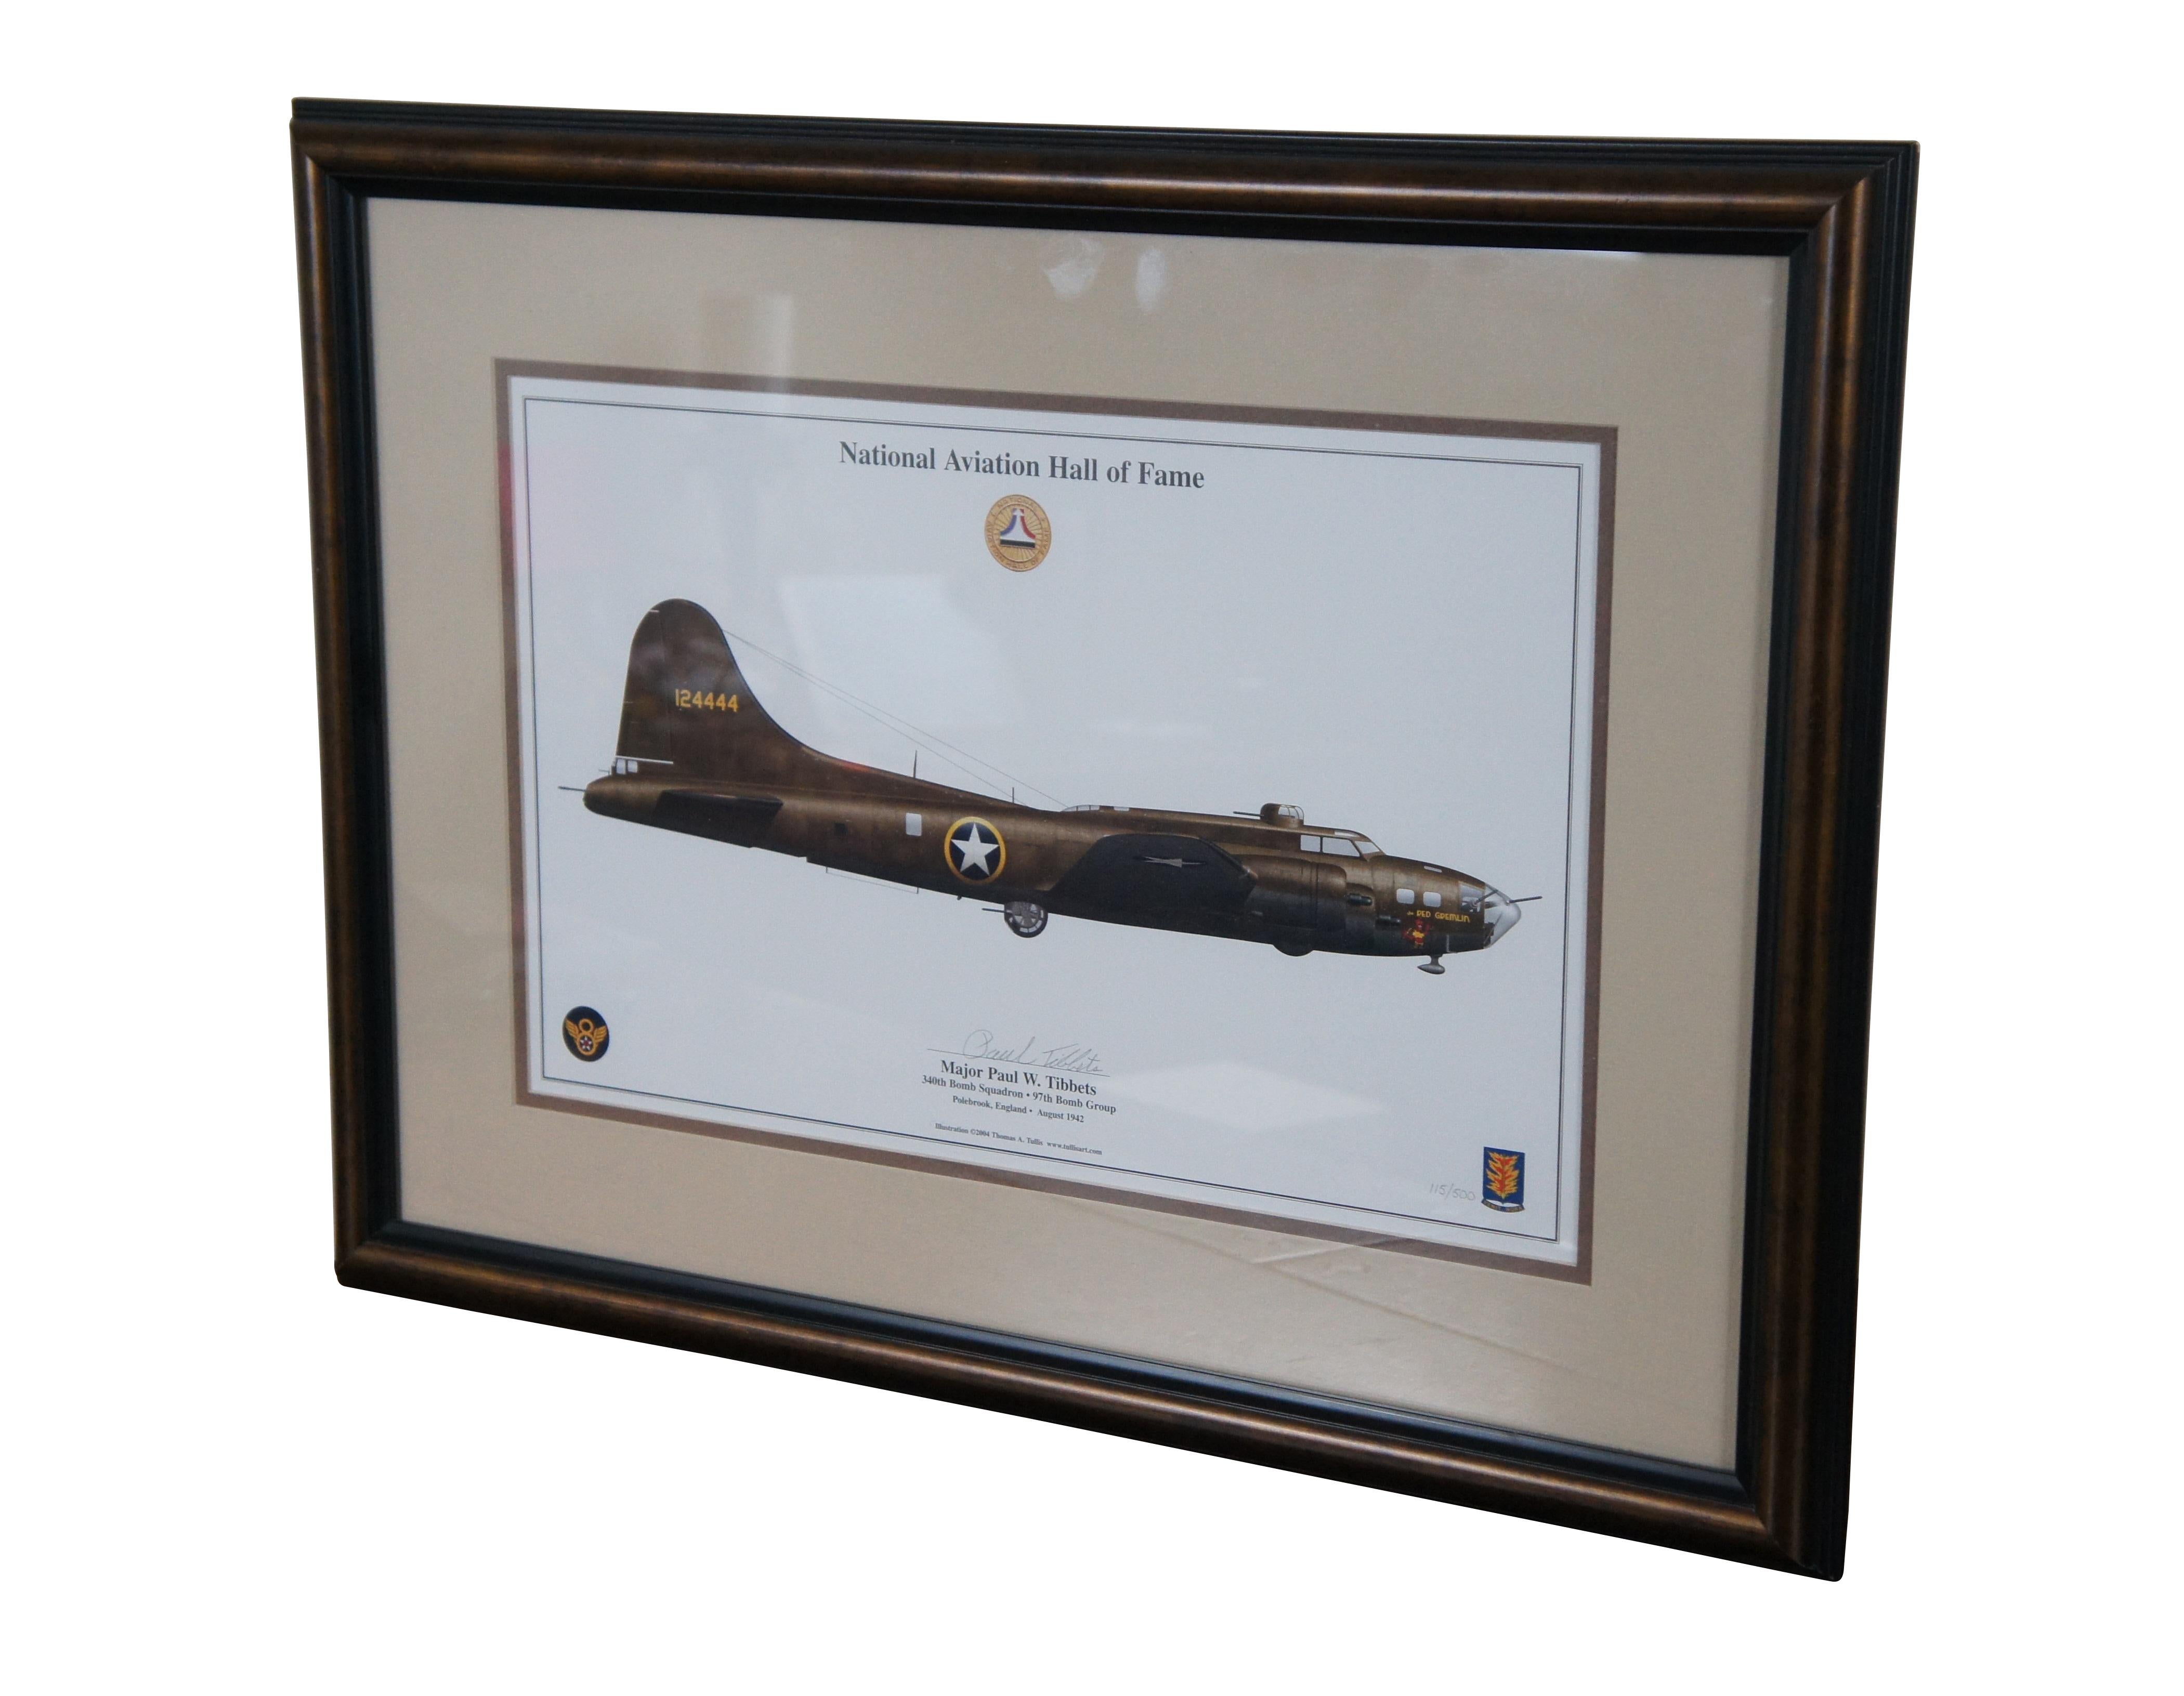 National Aviation Hall of Fame Limited Edition Print Series, signed numbered and professionally framed

Major Paul W. Tibbets S&N Print, B-17 Gremlin. 340th Bomb Squadron, 97th Bomb Group.

Edition 115 of 500

Paul Warfield Tibbets Jr. was a